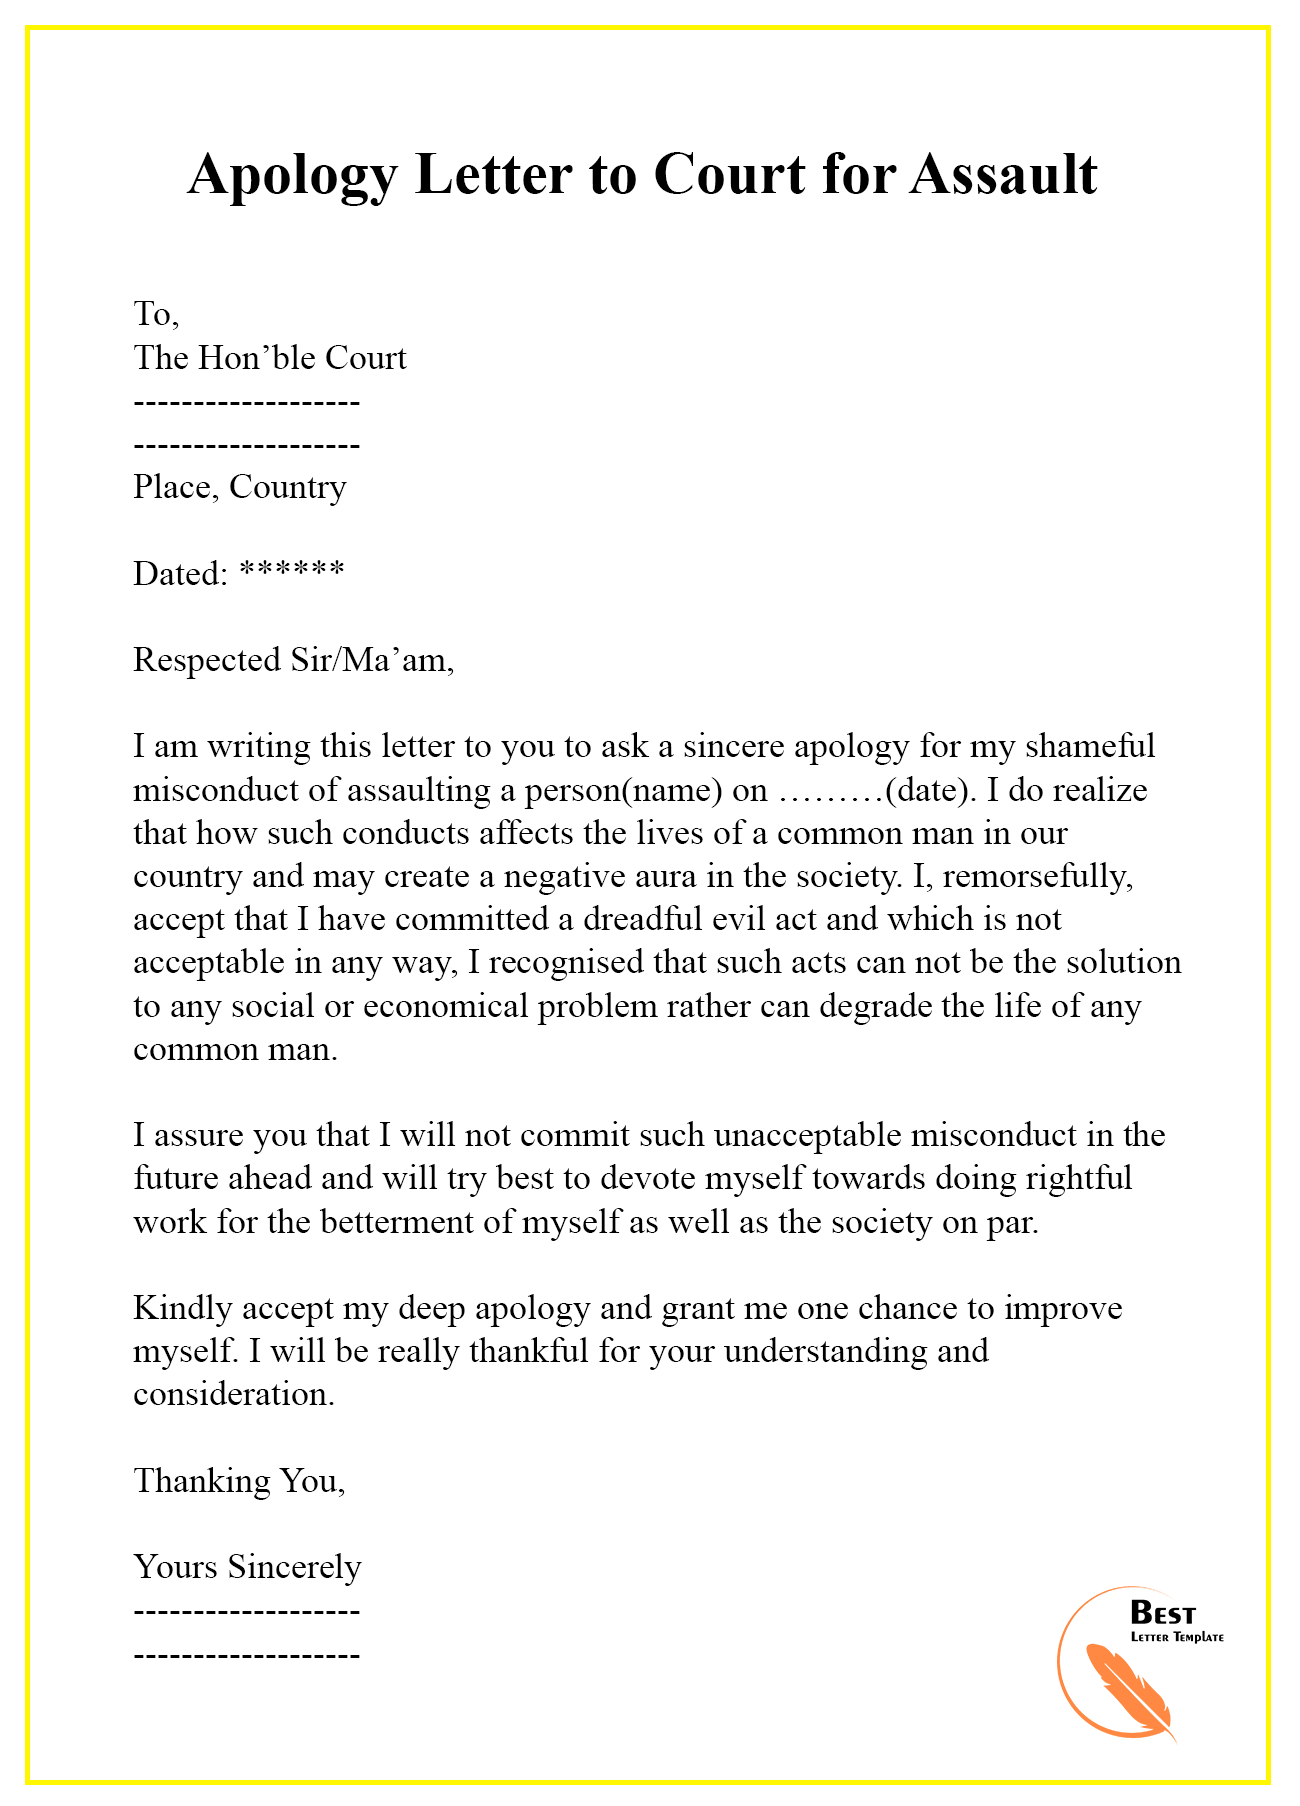 Apology Letter To Court For Assault Best Letter Template